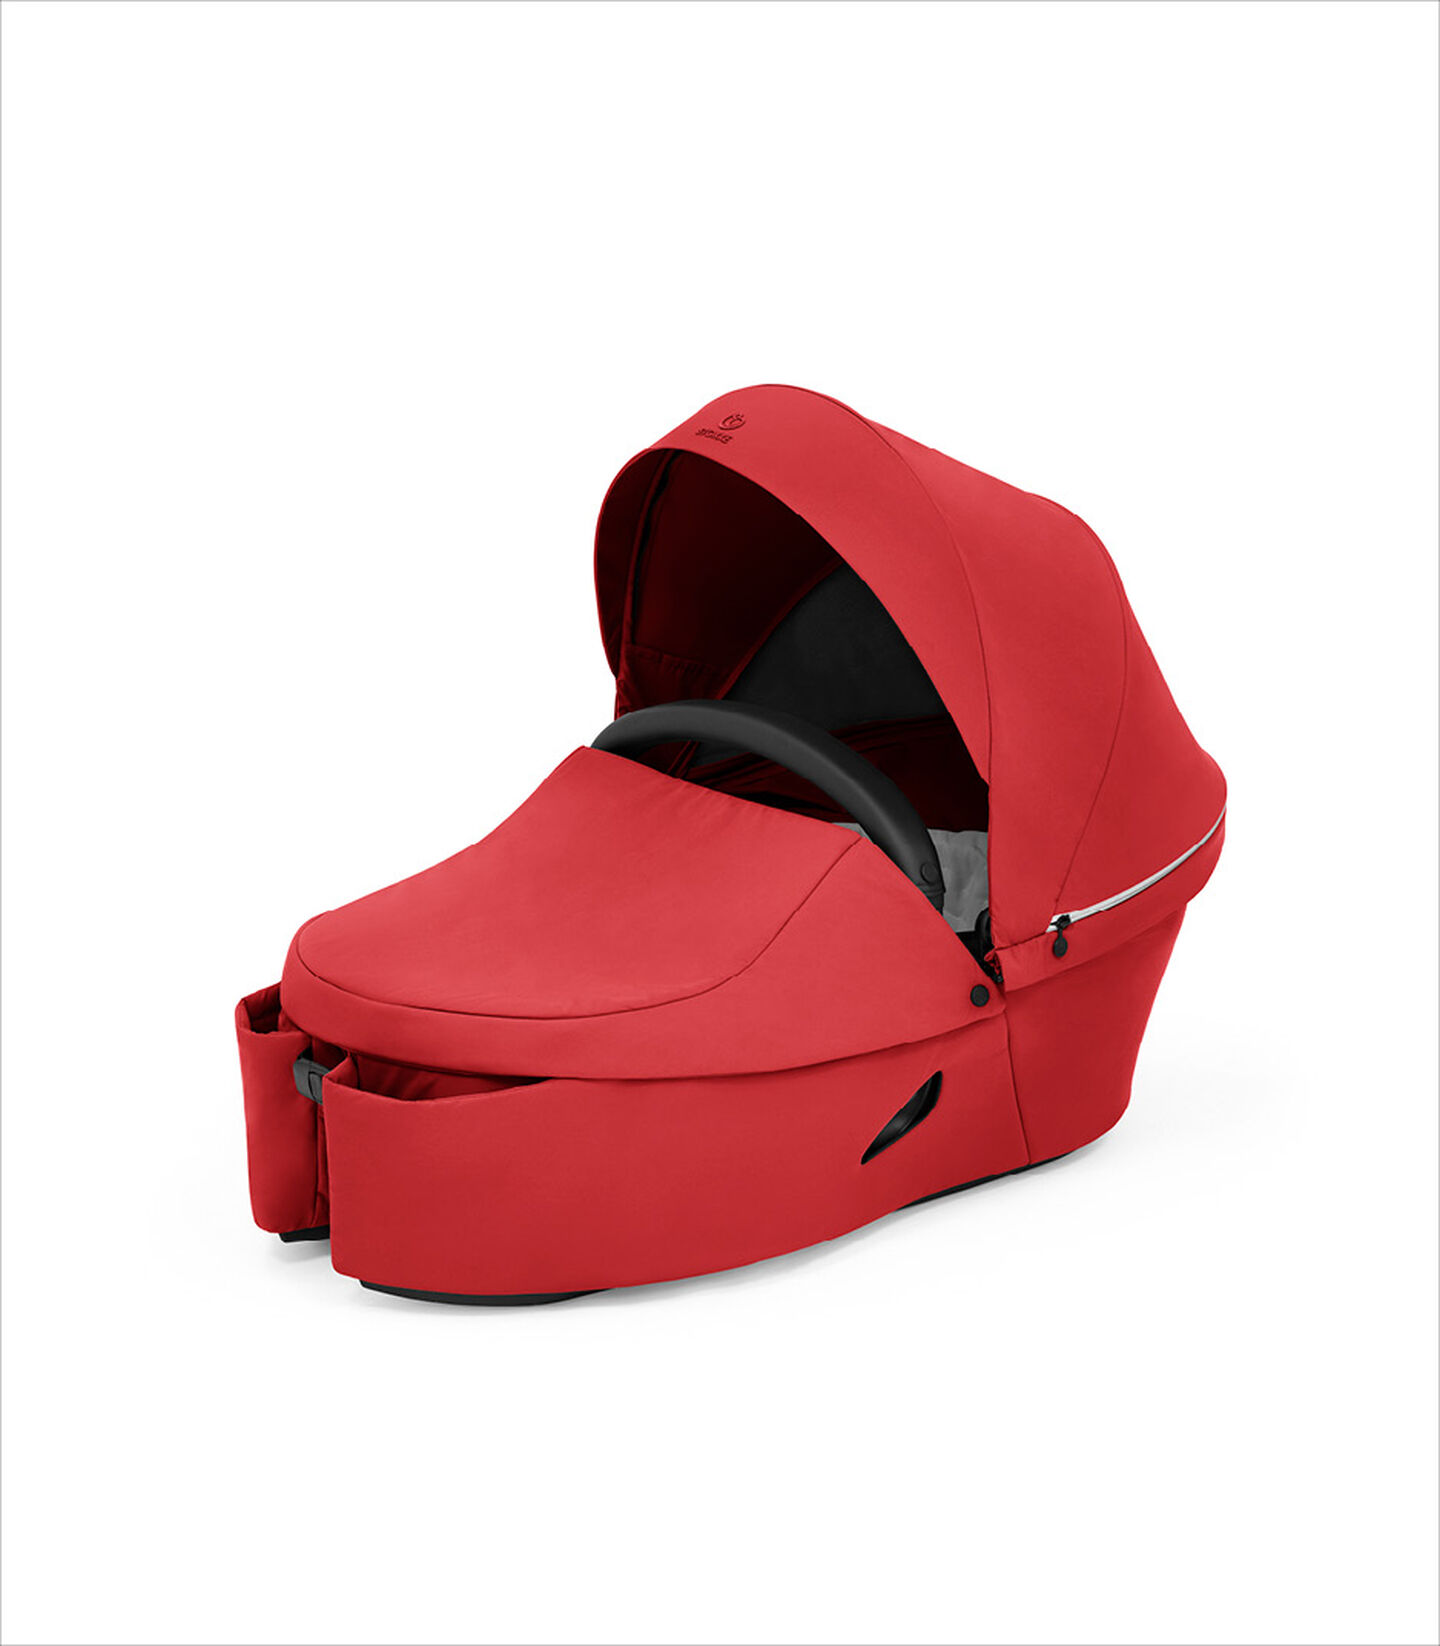 Stokke® Xplory® Liggedel Ruby Red, Ruby Red, mainview view 6